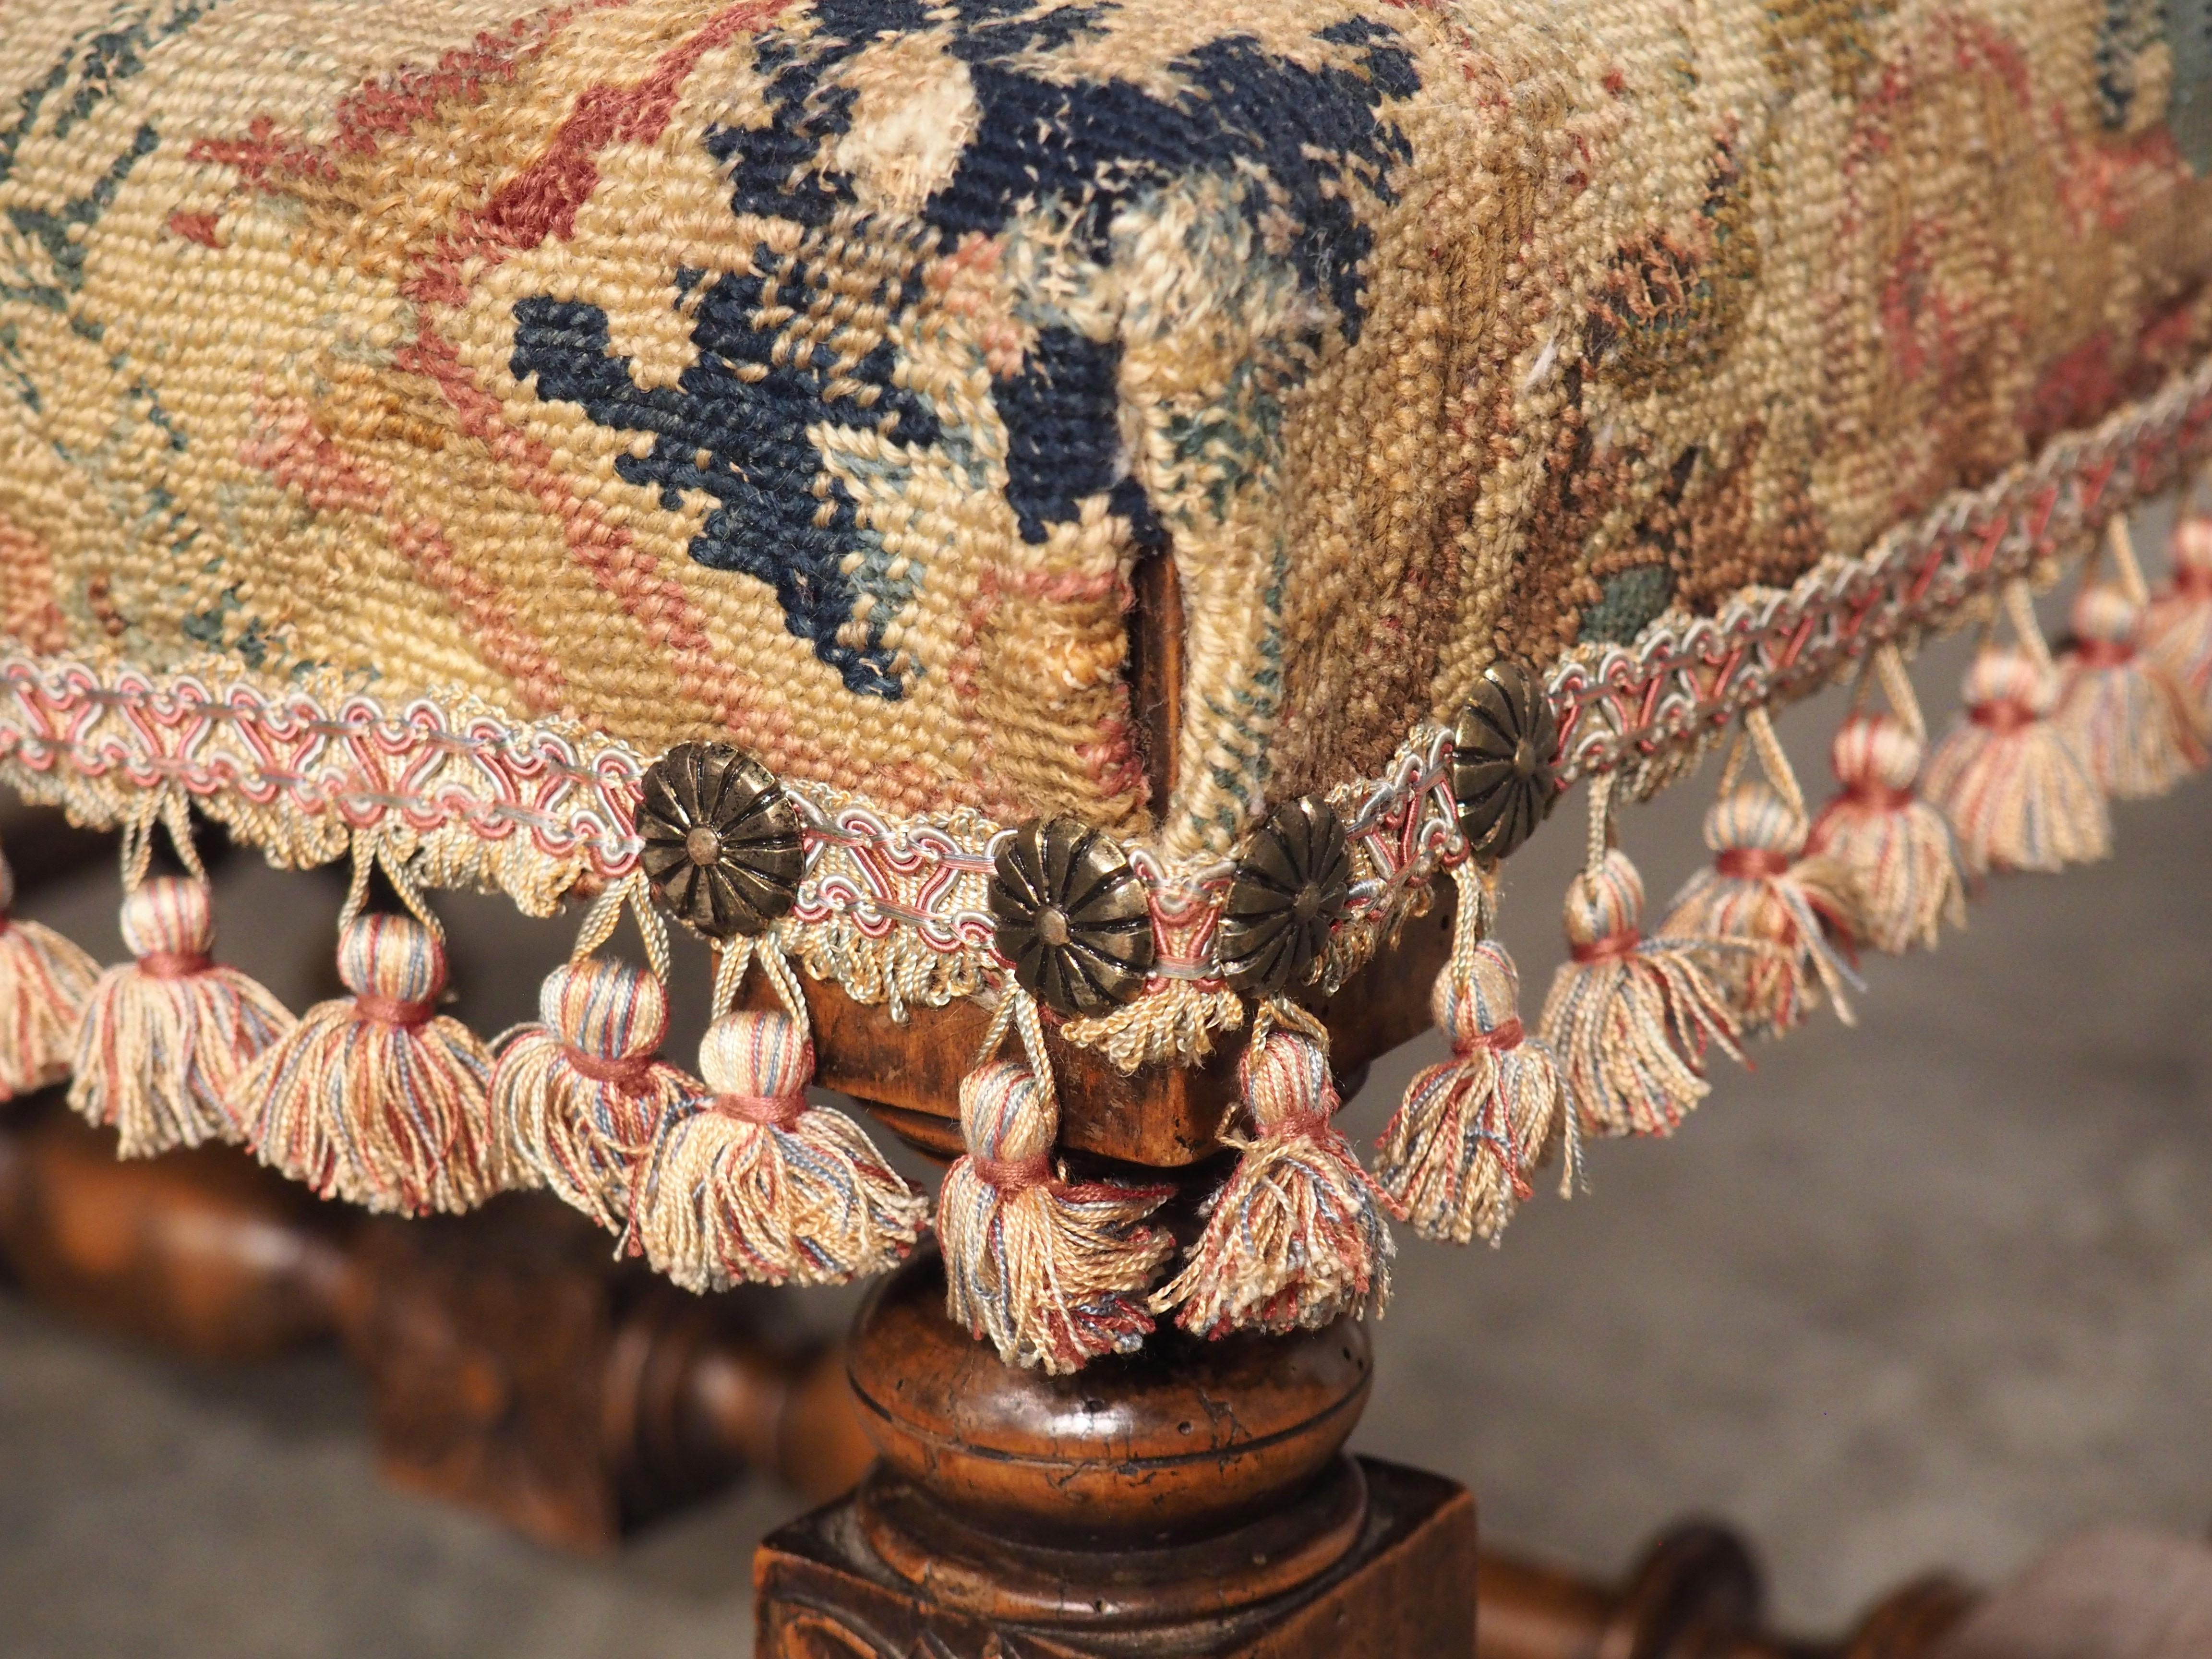 Hand-carved in the style of Louis XIII, this large needlepoint upholstered tabouret is from France, circa 1870. Typical period motifs are noticeable, including the turned H-stretcher on bun feet, daisy-like iron nail heads (four on each corner)